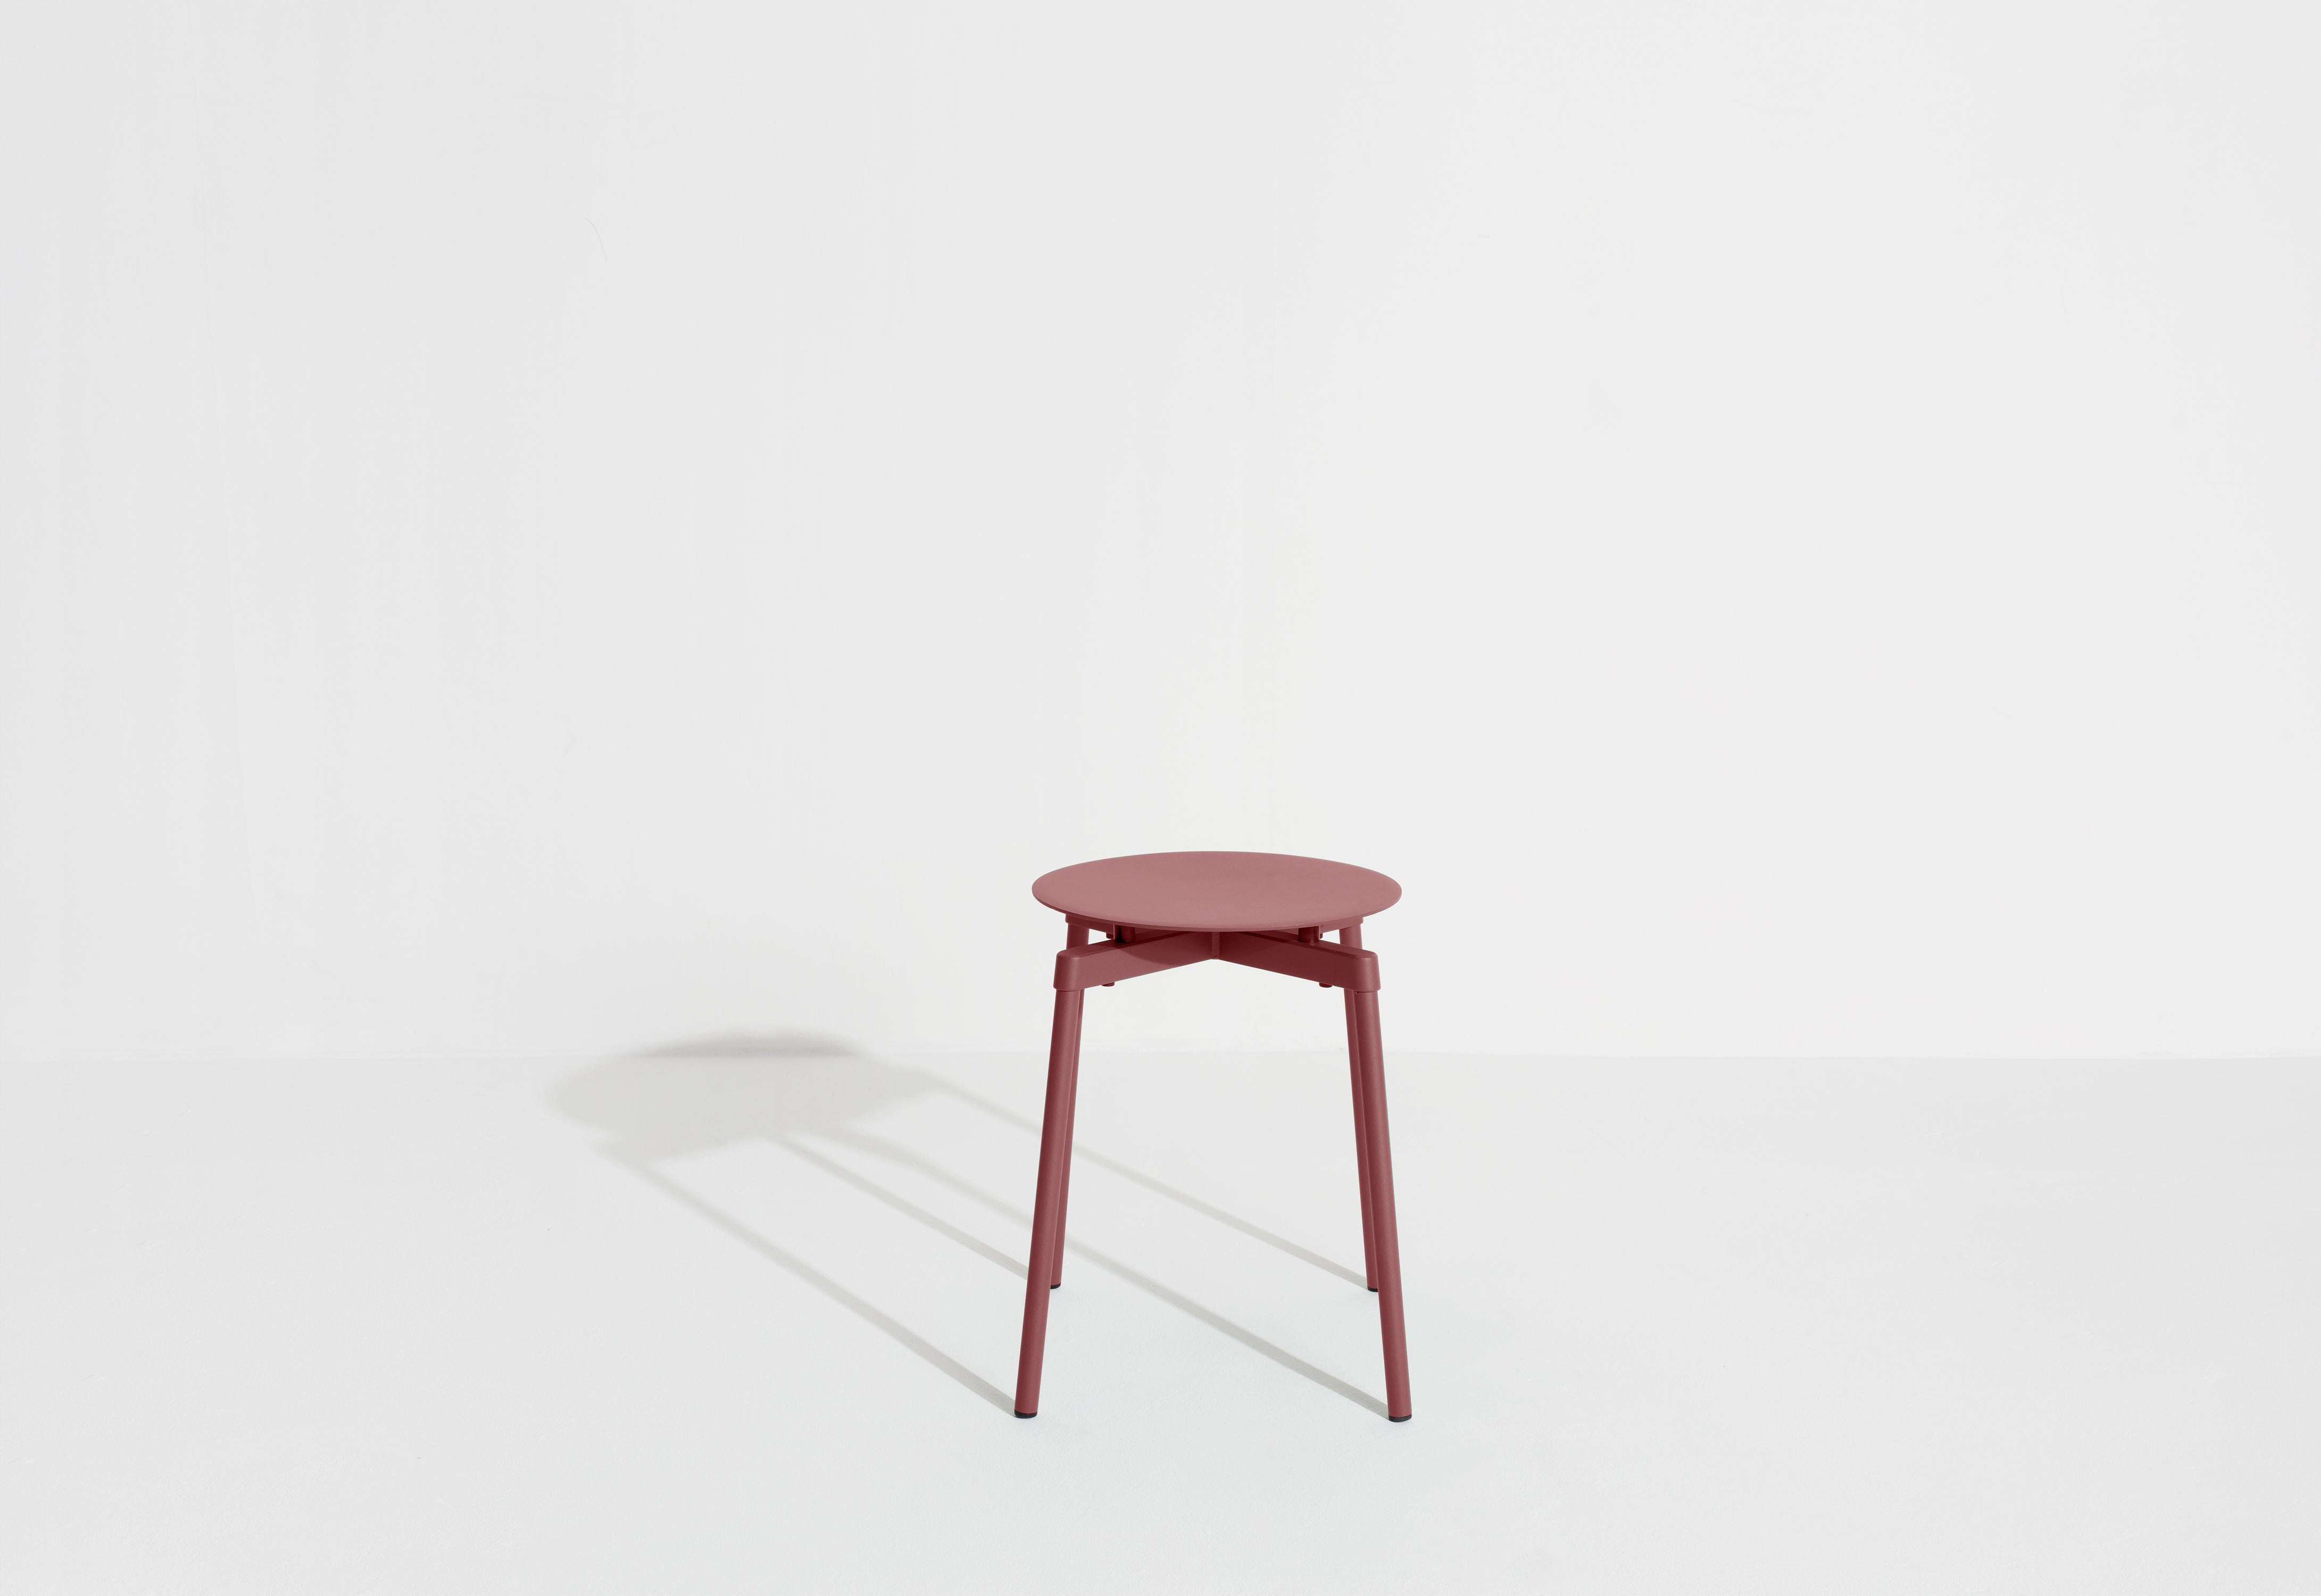 Petite Friture Fromme Stool in Brown-Red Aluminium by Tom Chung, 2020 In New Condition For Sale In Brooklyn, NY